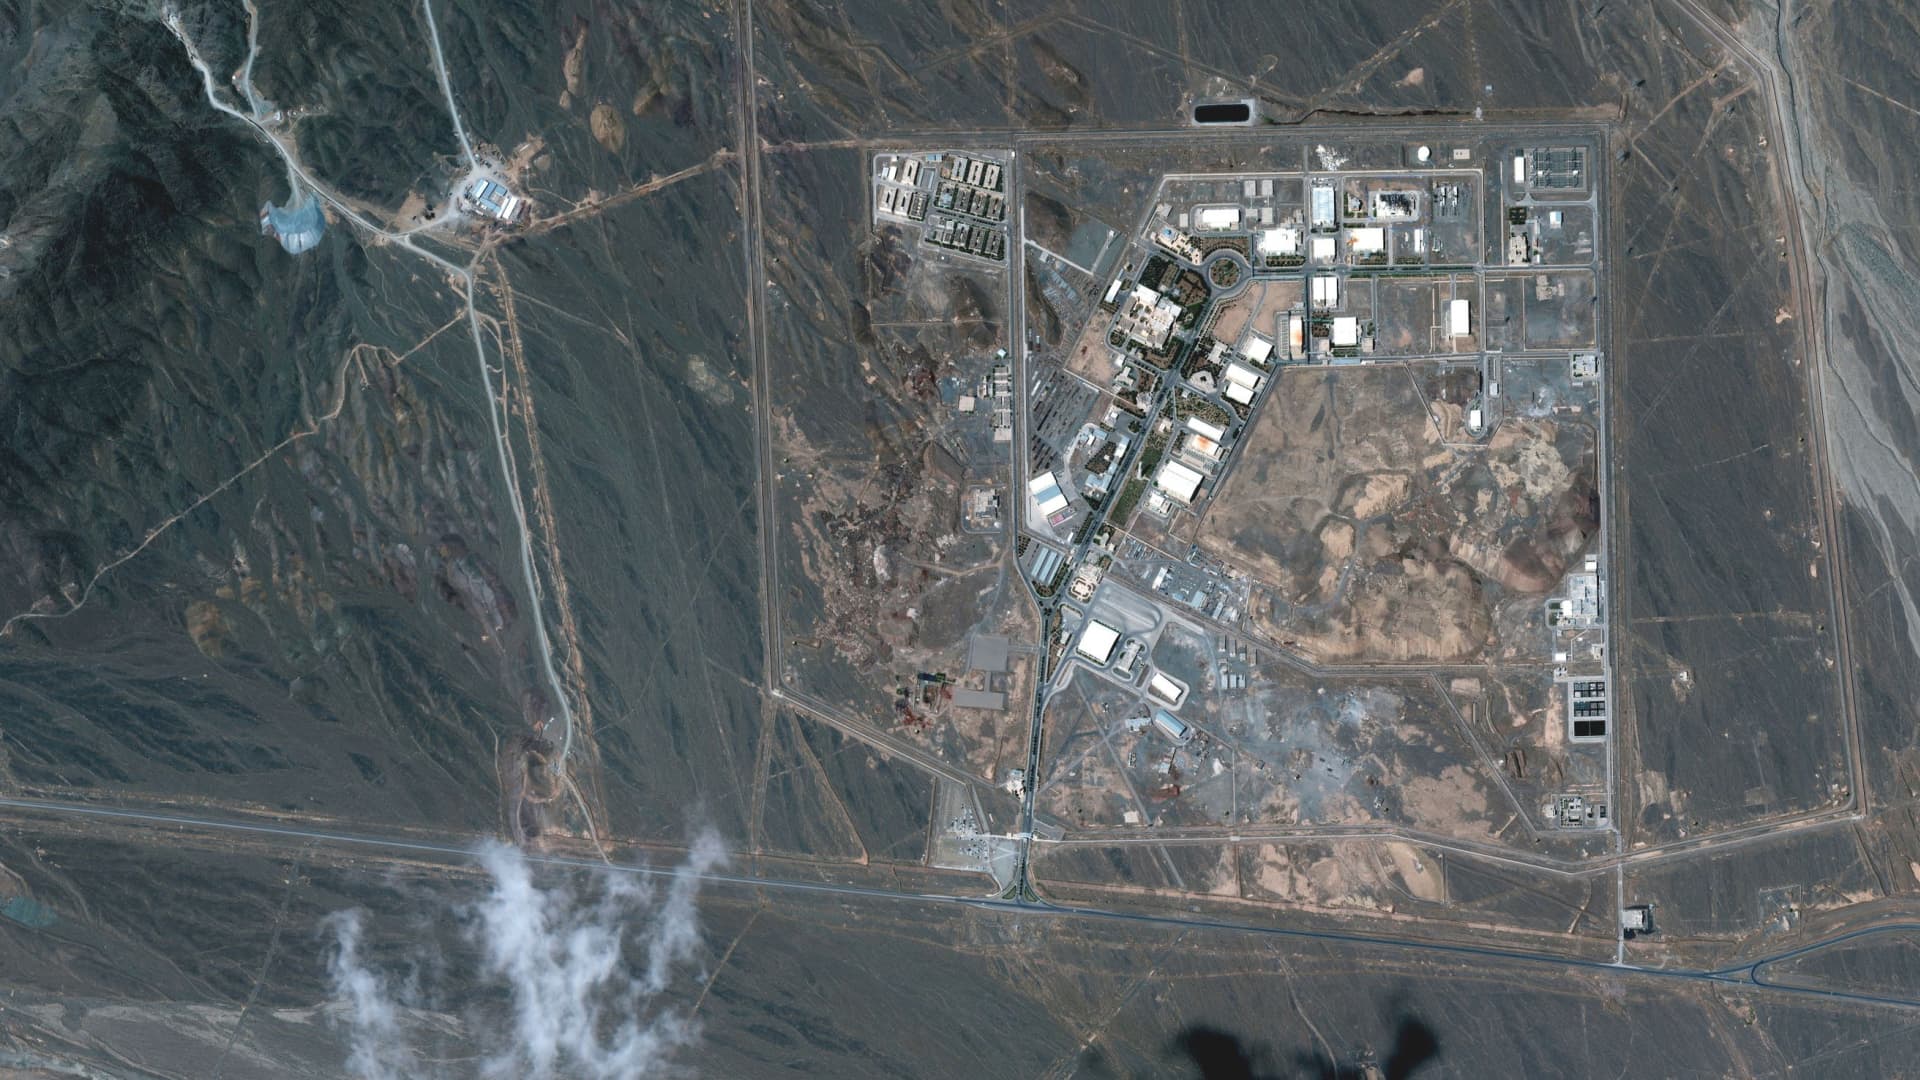 A view of the Natanz uranium enrichment facility 250 km (155 miles) south of the Iranian capital Tehran, in this Maxar Technologies satellite image taken last week and obtained by Reuters on April 12, 2021.